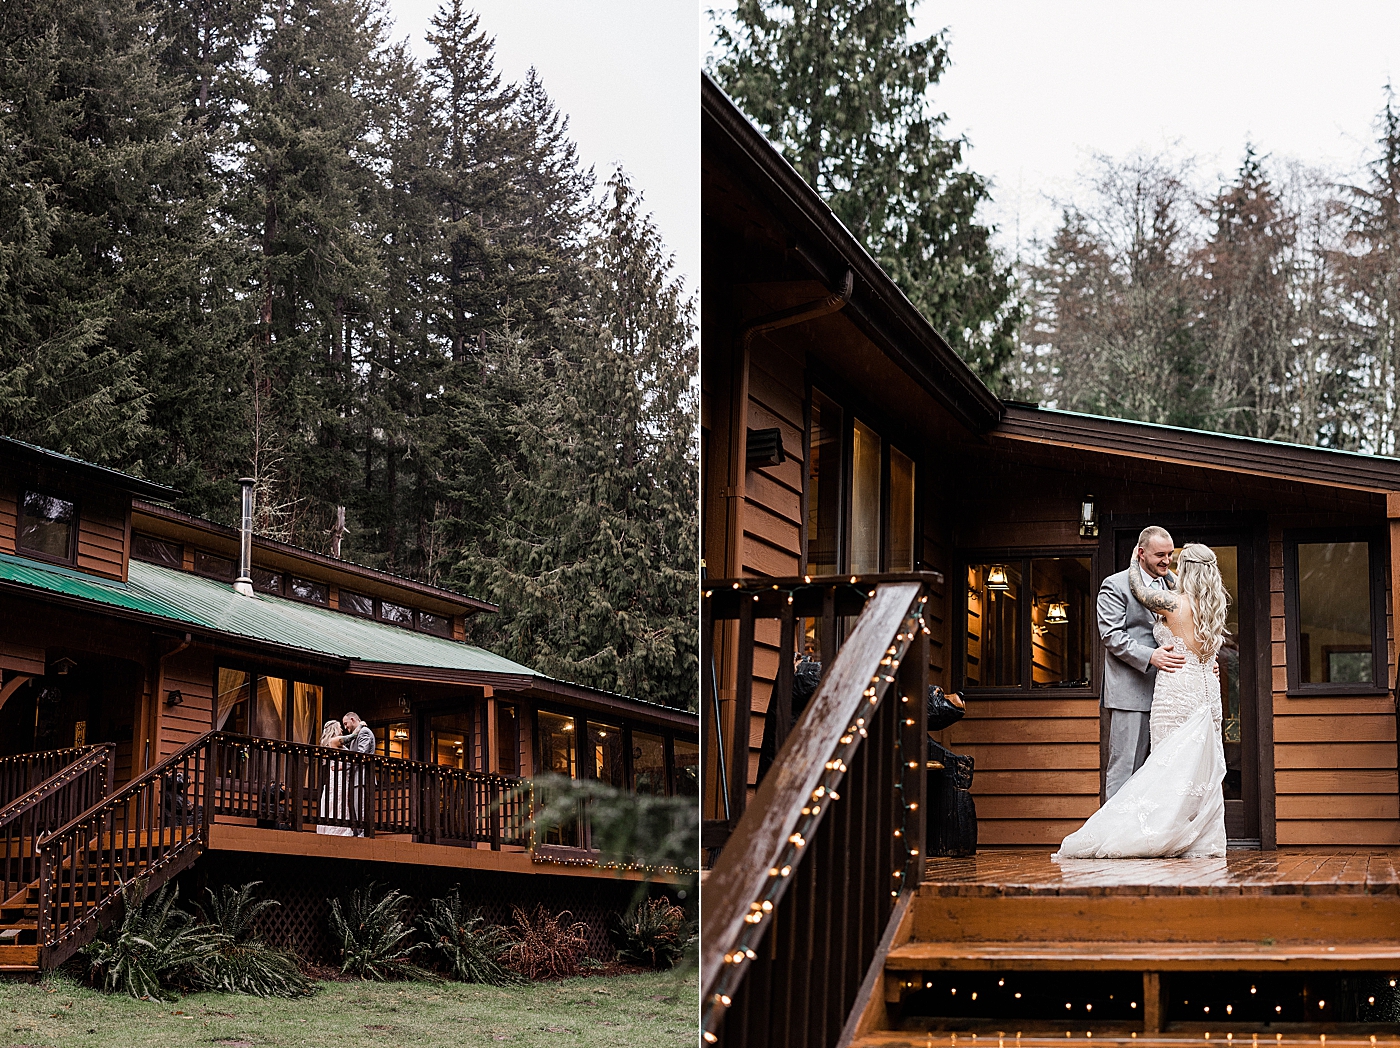 Bride and groom dancing on porch at AirBnB cabin in Ashford, WA. Photo by Megan Montalvo Photography.